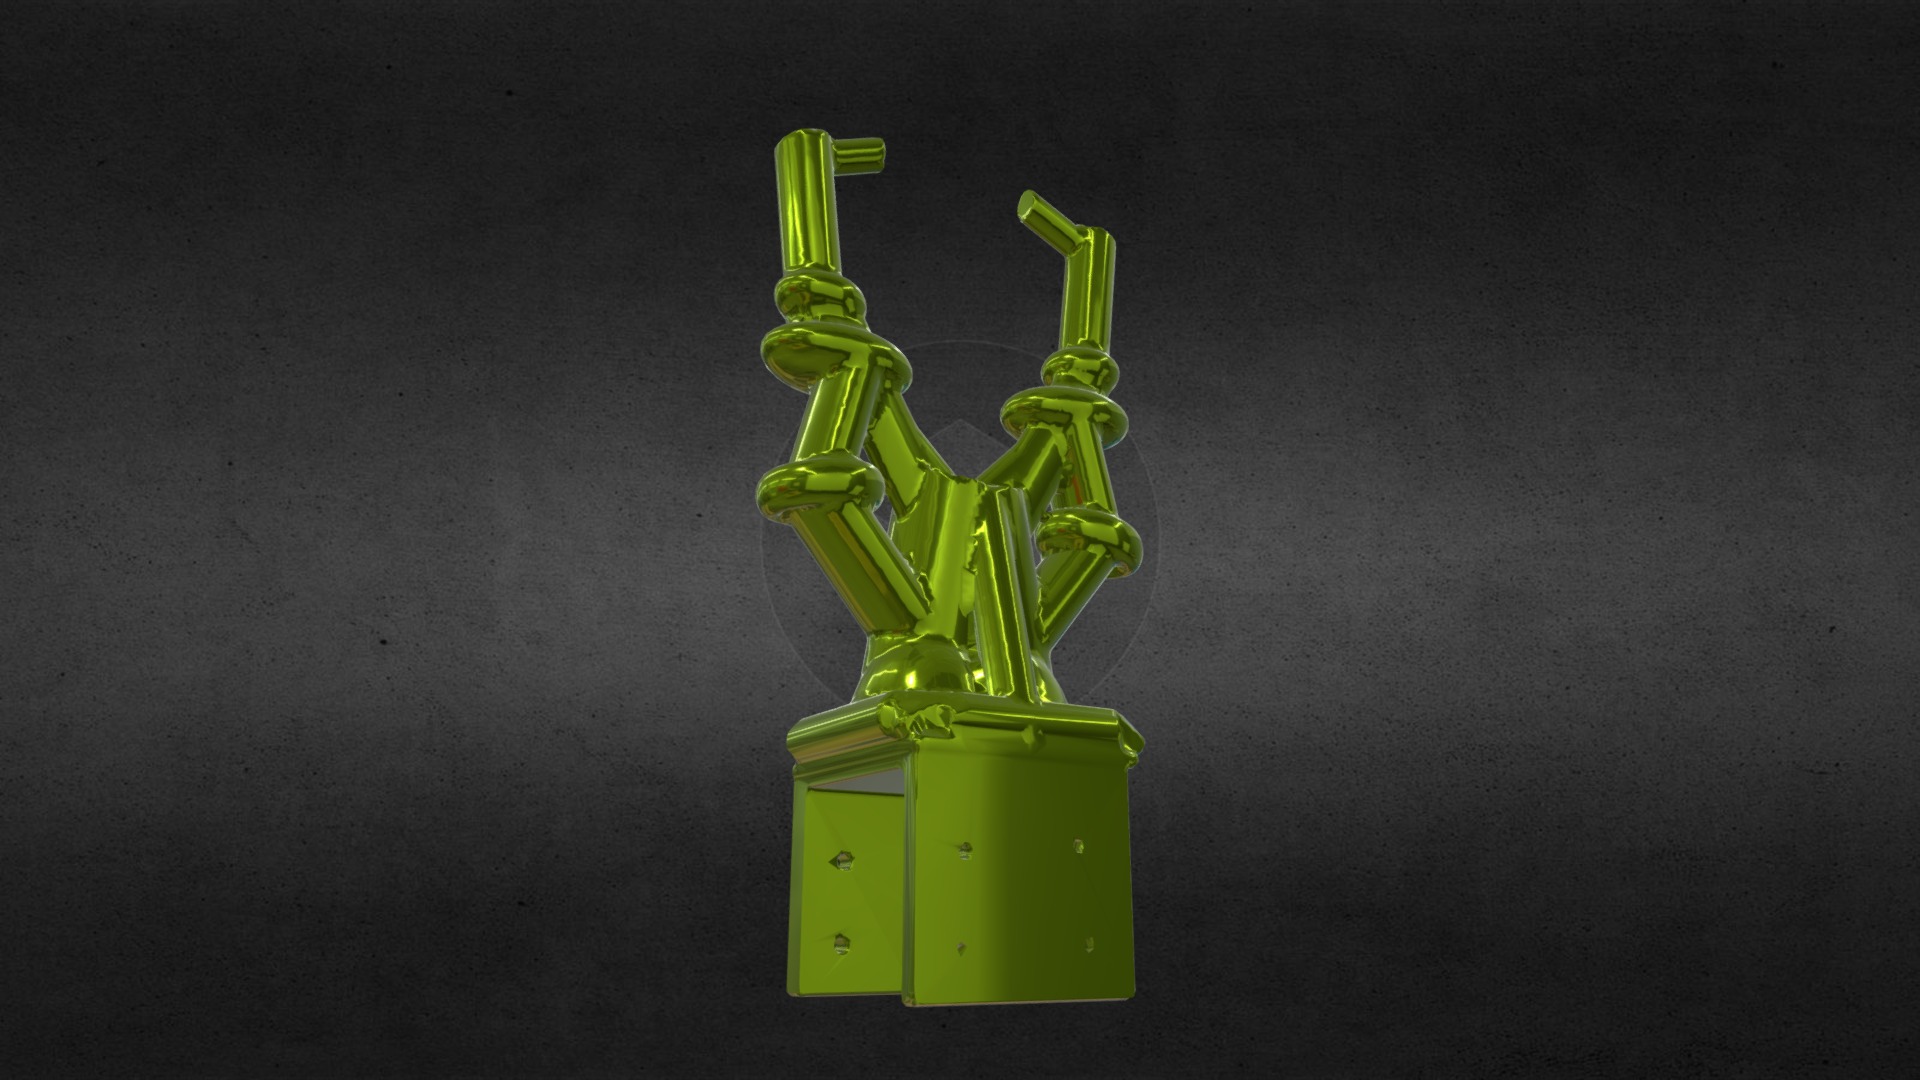 3D model DIRECT CLAMP WITH GUITAR HANGER - This is a 3D model of the DIRECT CLAMP WITH GUITAR HANGER. The 3D model is about a green toy on a black surface.